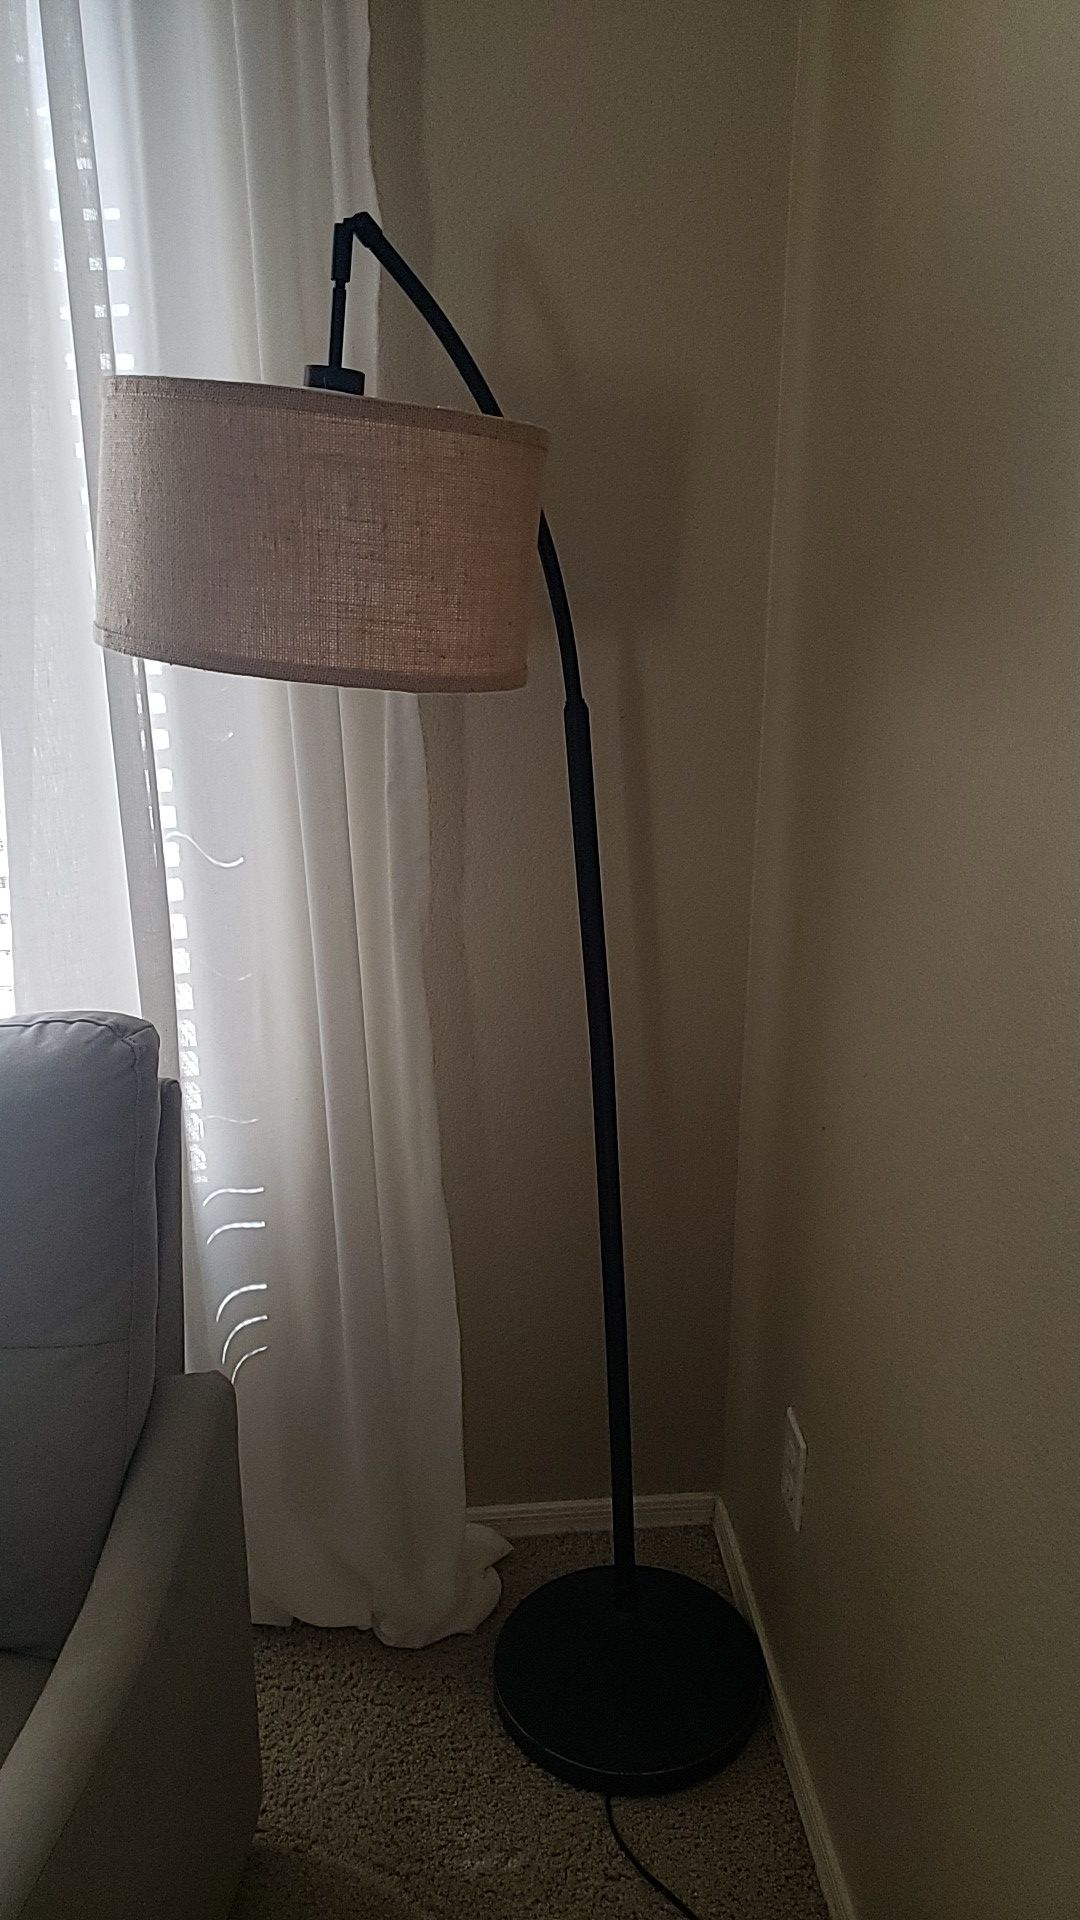 Floor lamp come today or gone